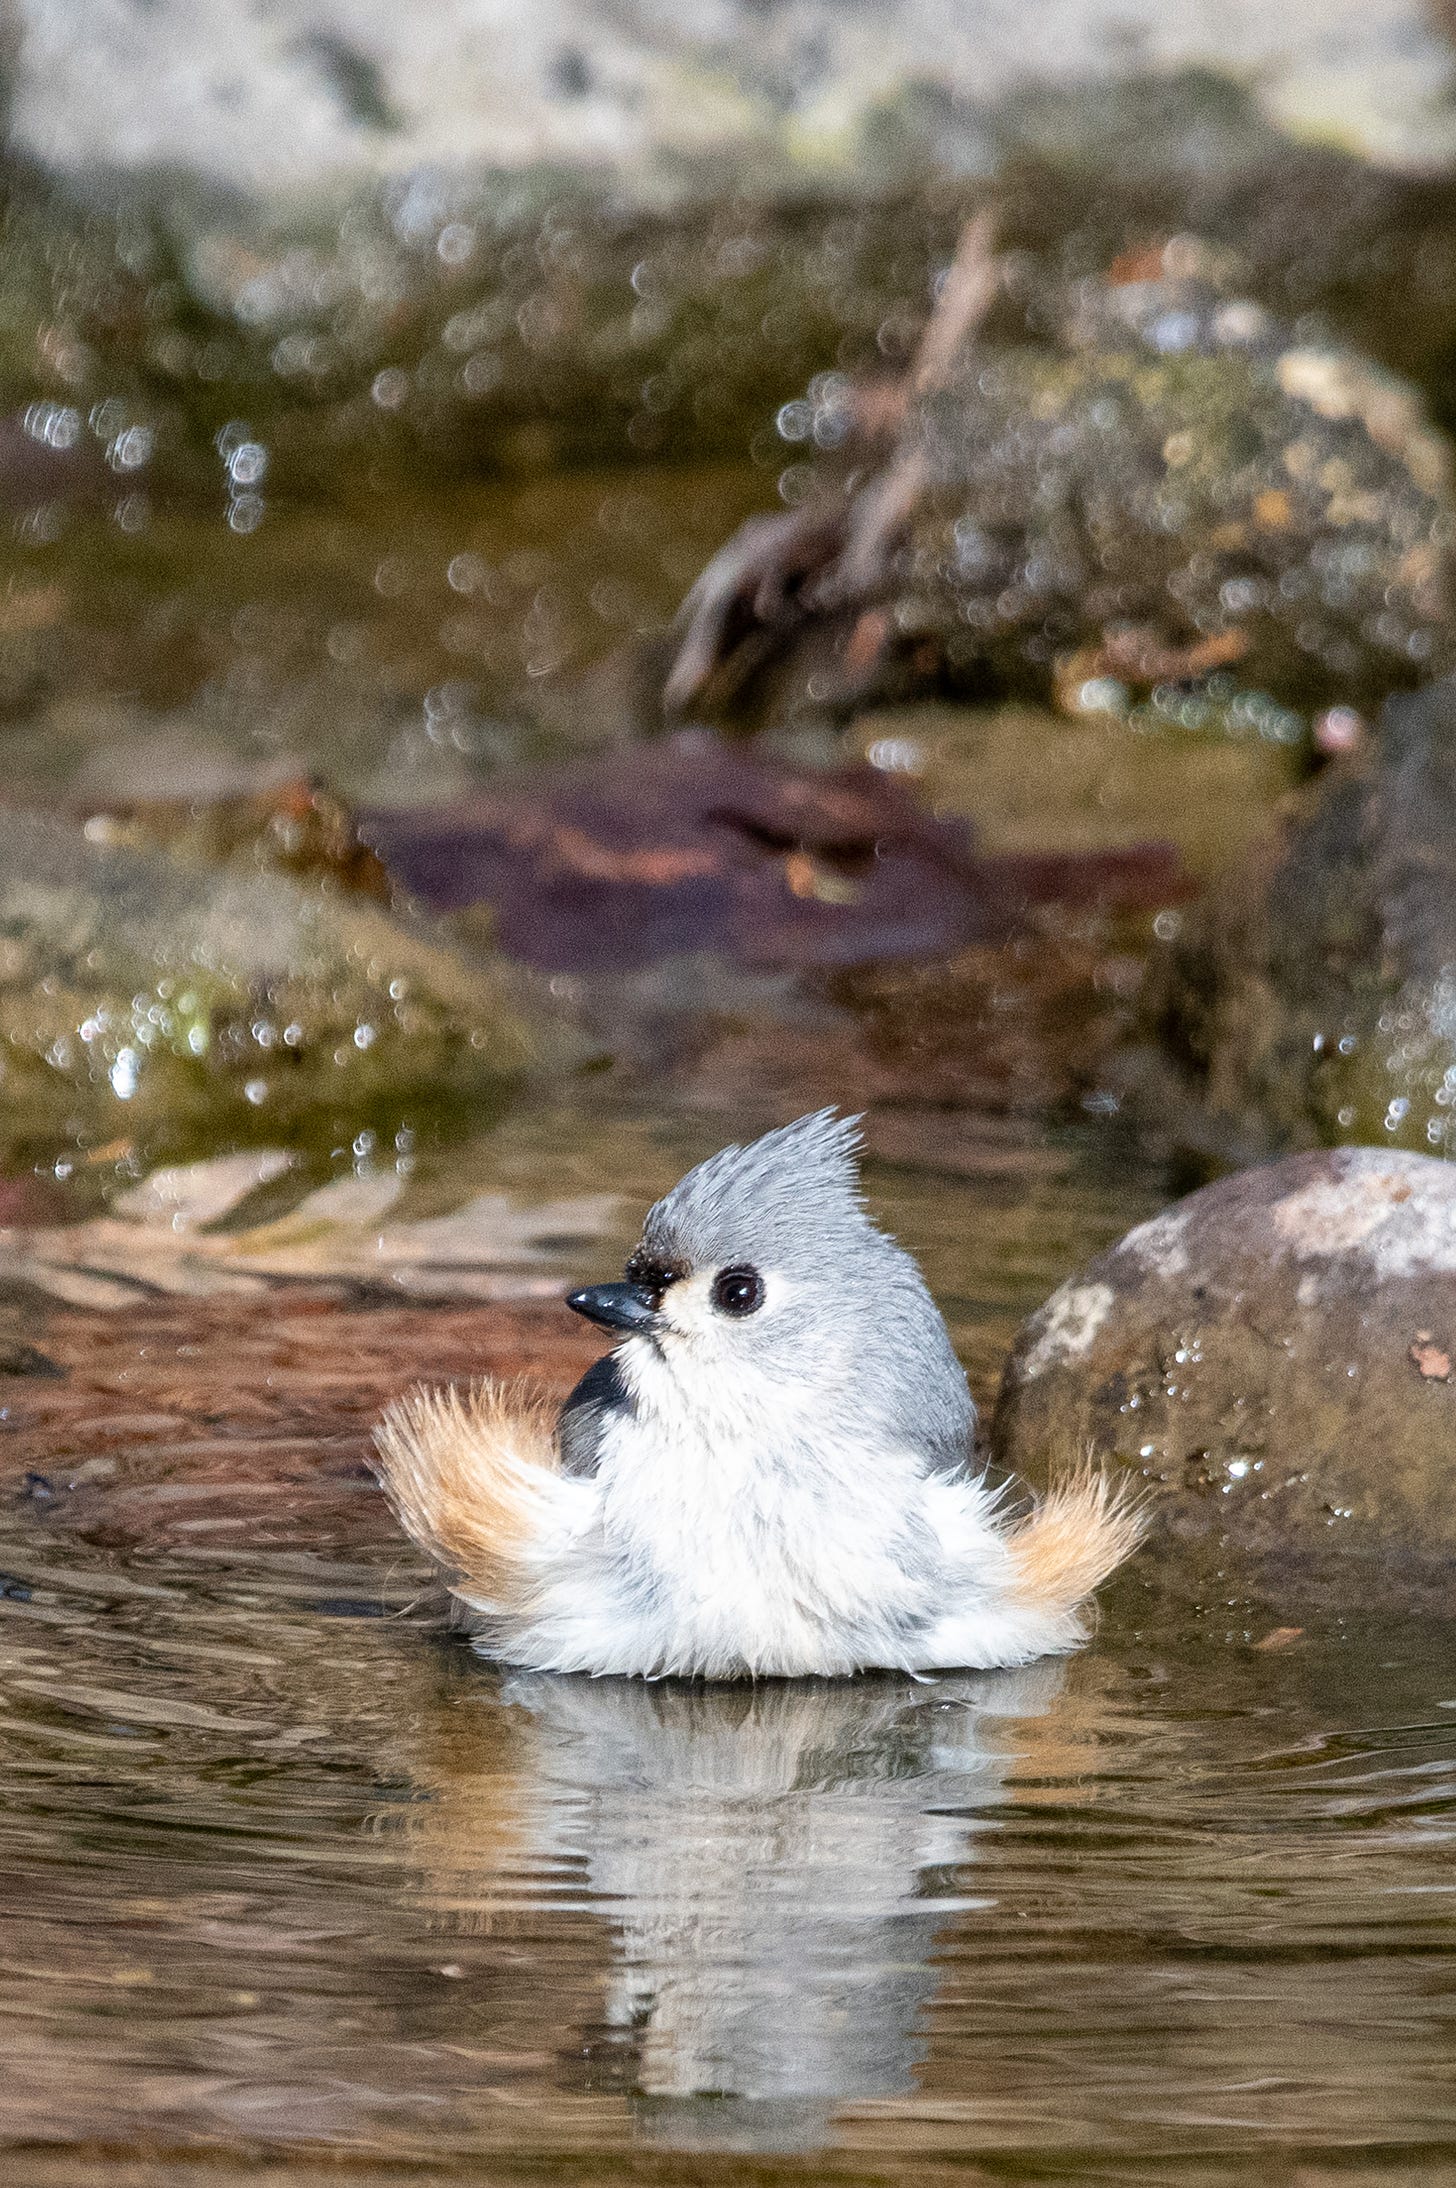 A tufted titmouse, all fluffed up, is sitting in water, about to bathe